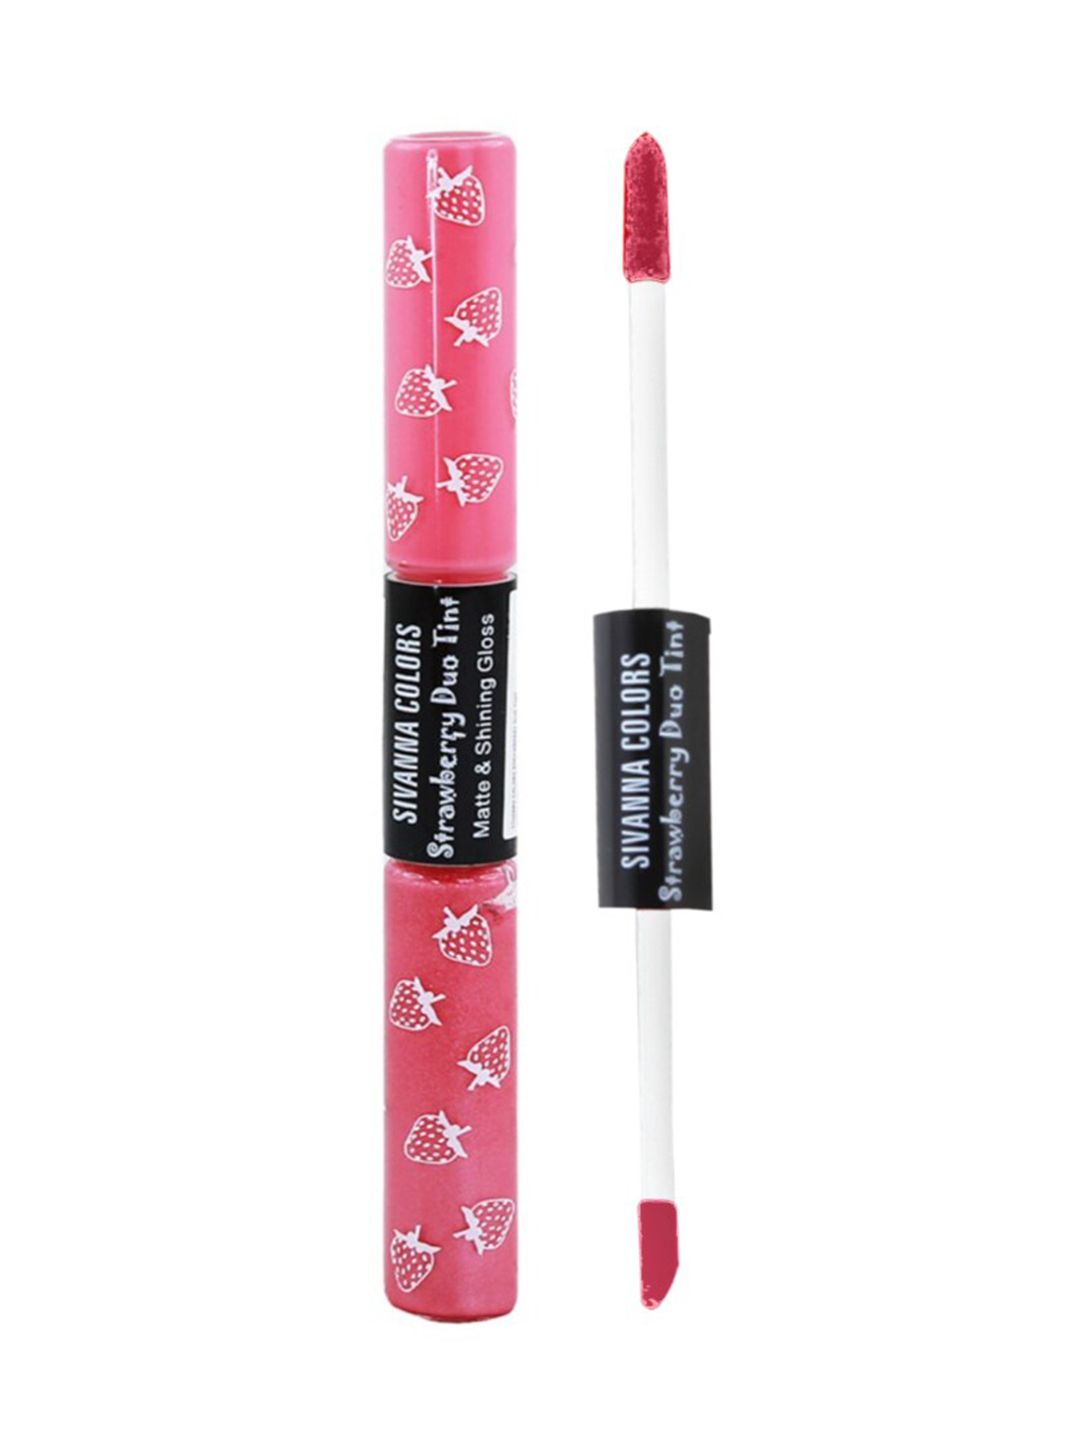 Sivanna Colors 2 in 1 Strawberry Duo Tint Matte & Shining Lip Gloss - DK035 06 Price in India